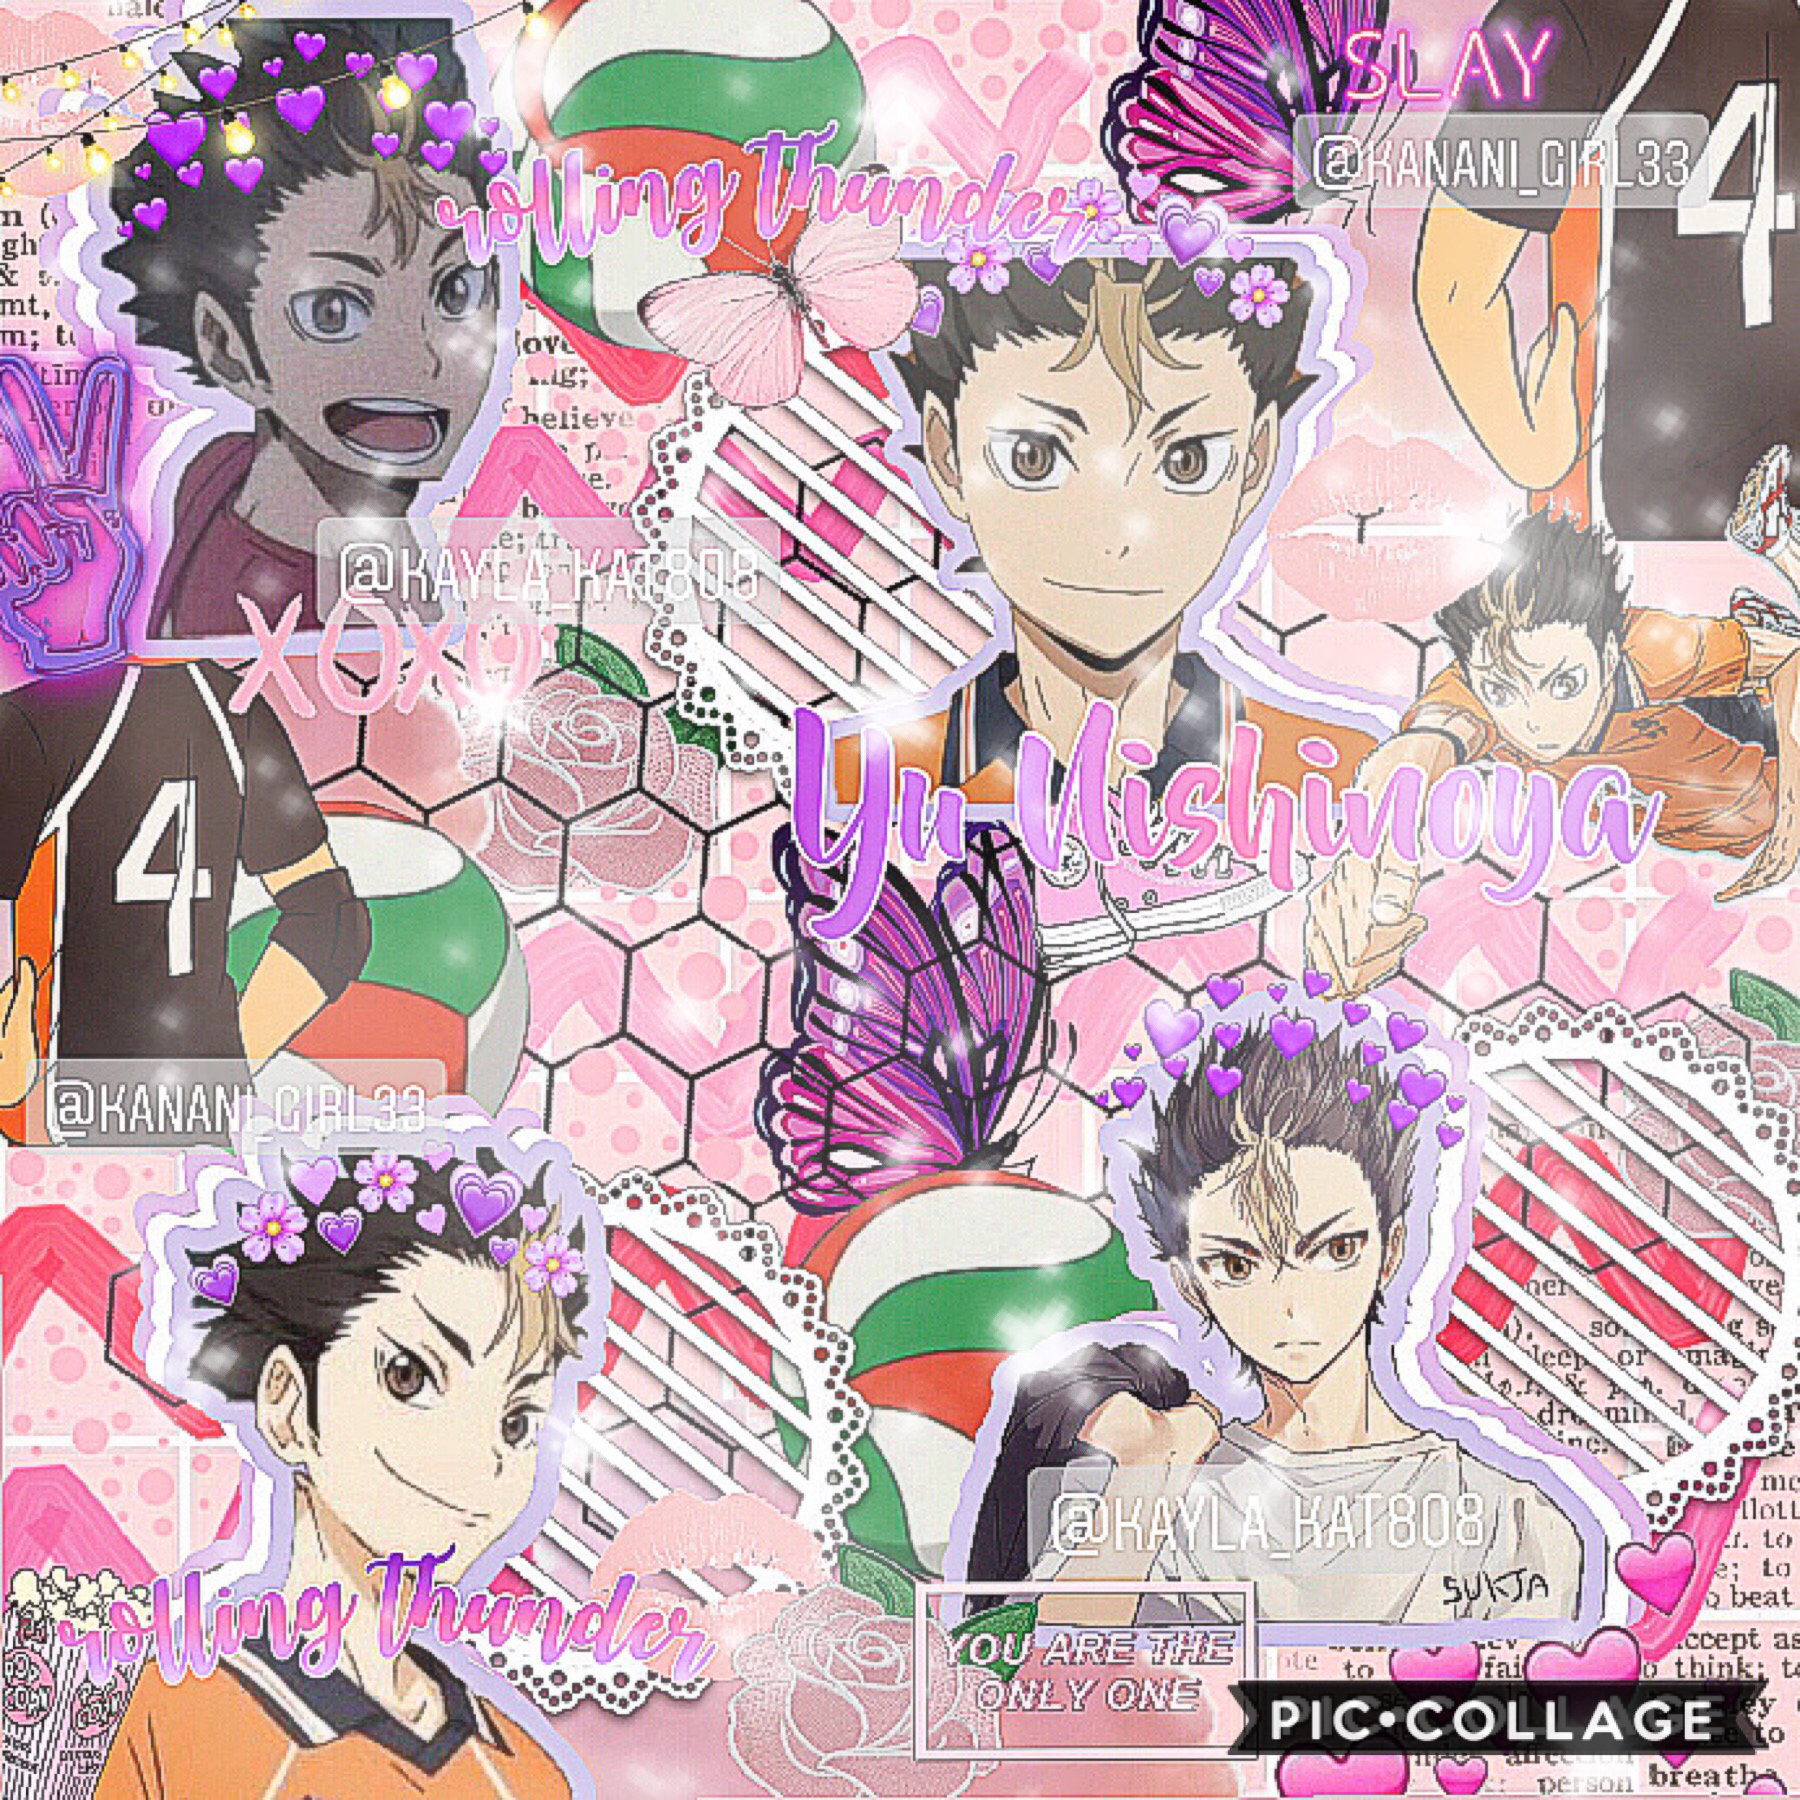 🌷tap🌷
december 8, 2020
here’s an edit of nishinoya! he’s so tiny but cute and is one of my favorites!! 💗 qotd: favorite anime/anime character? if you don’t watch then favorite underrated character? aotd: kageyama (as shown in previous collage) ♥️♥️